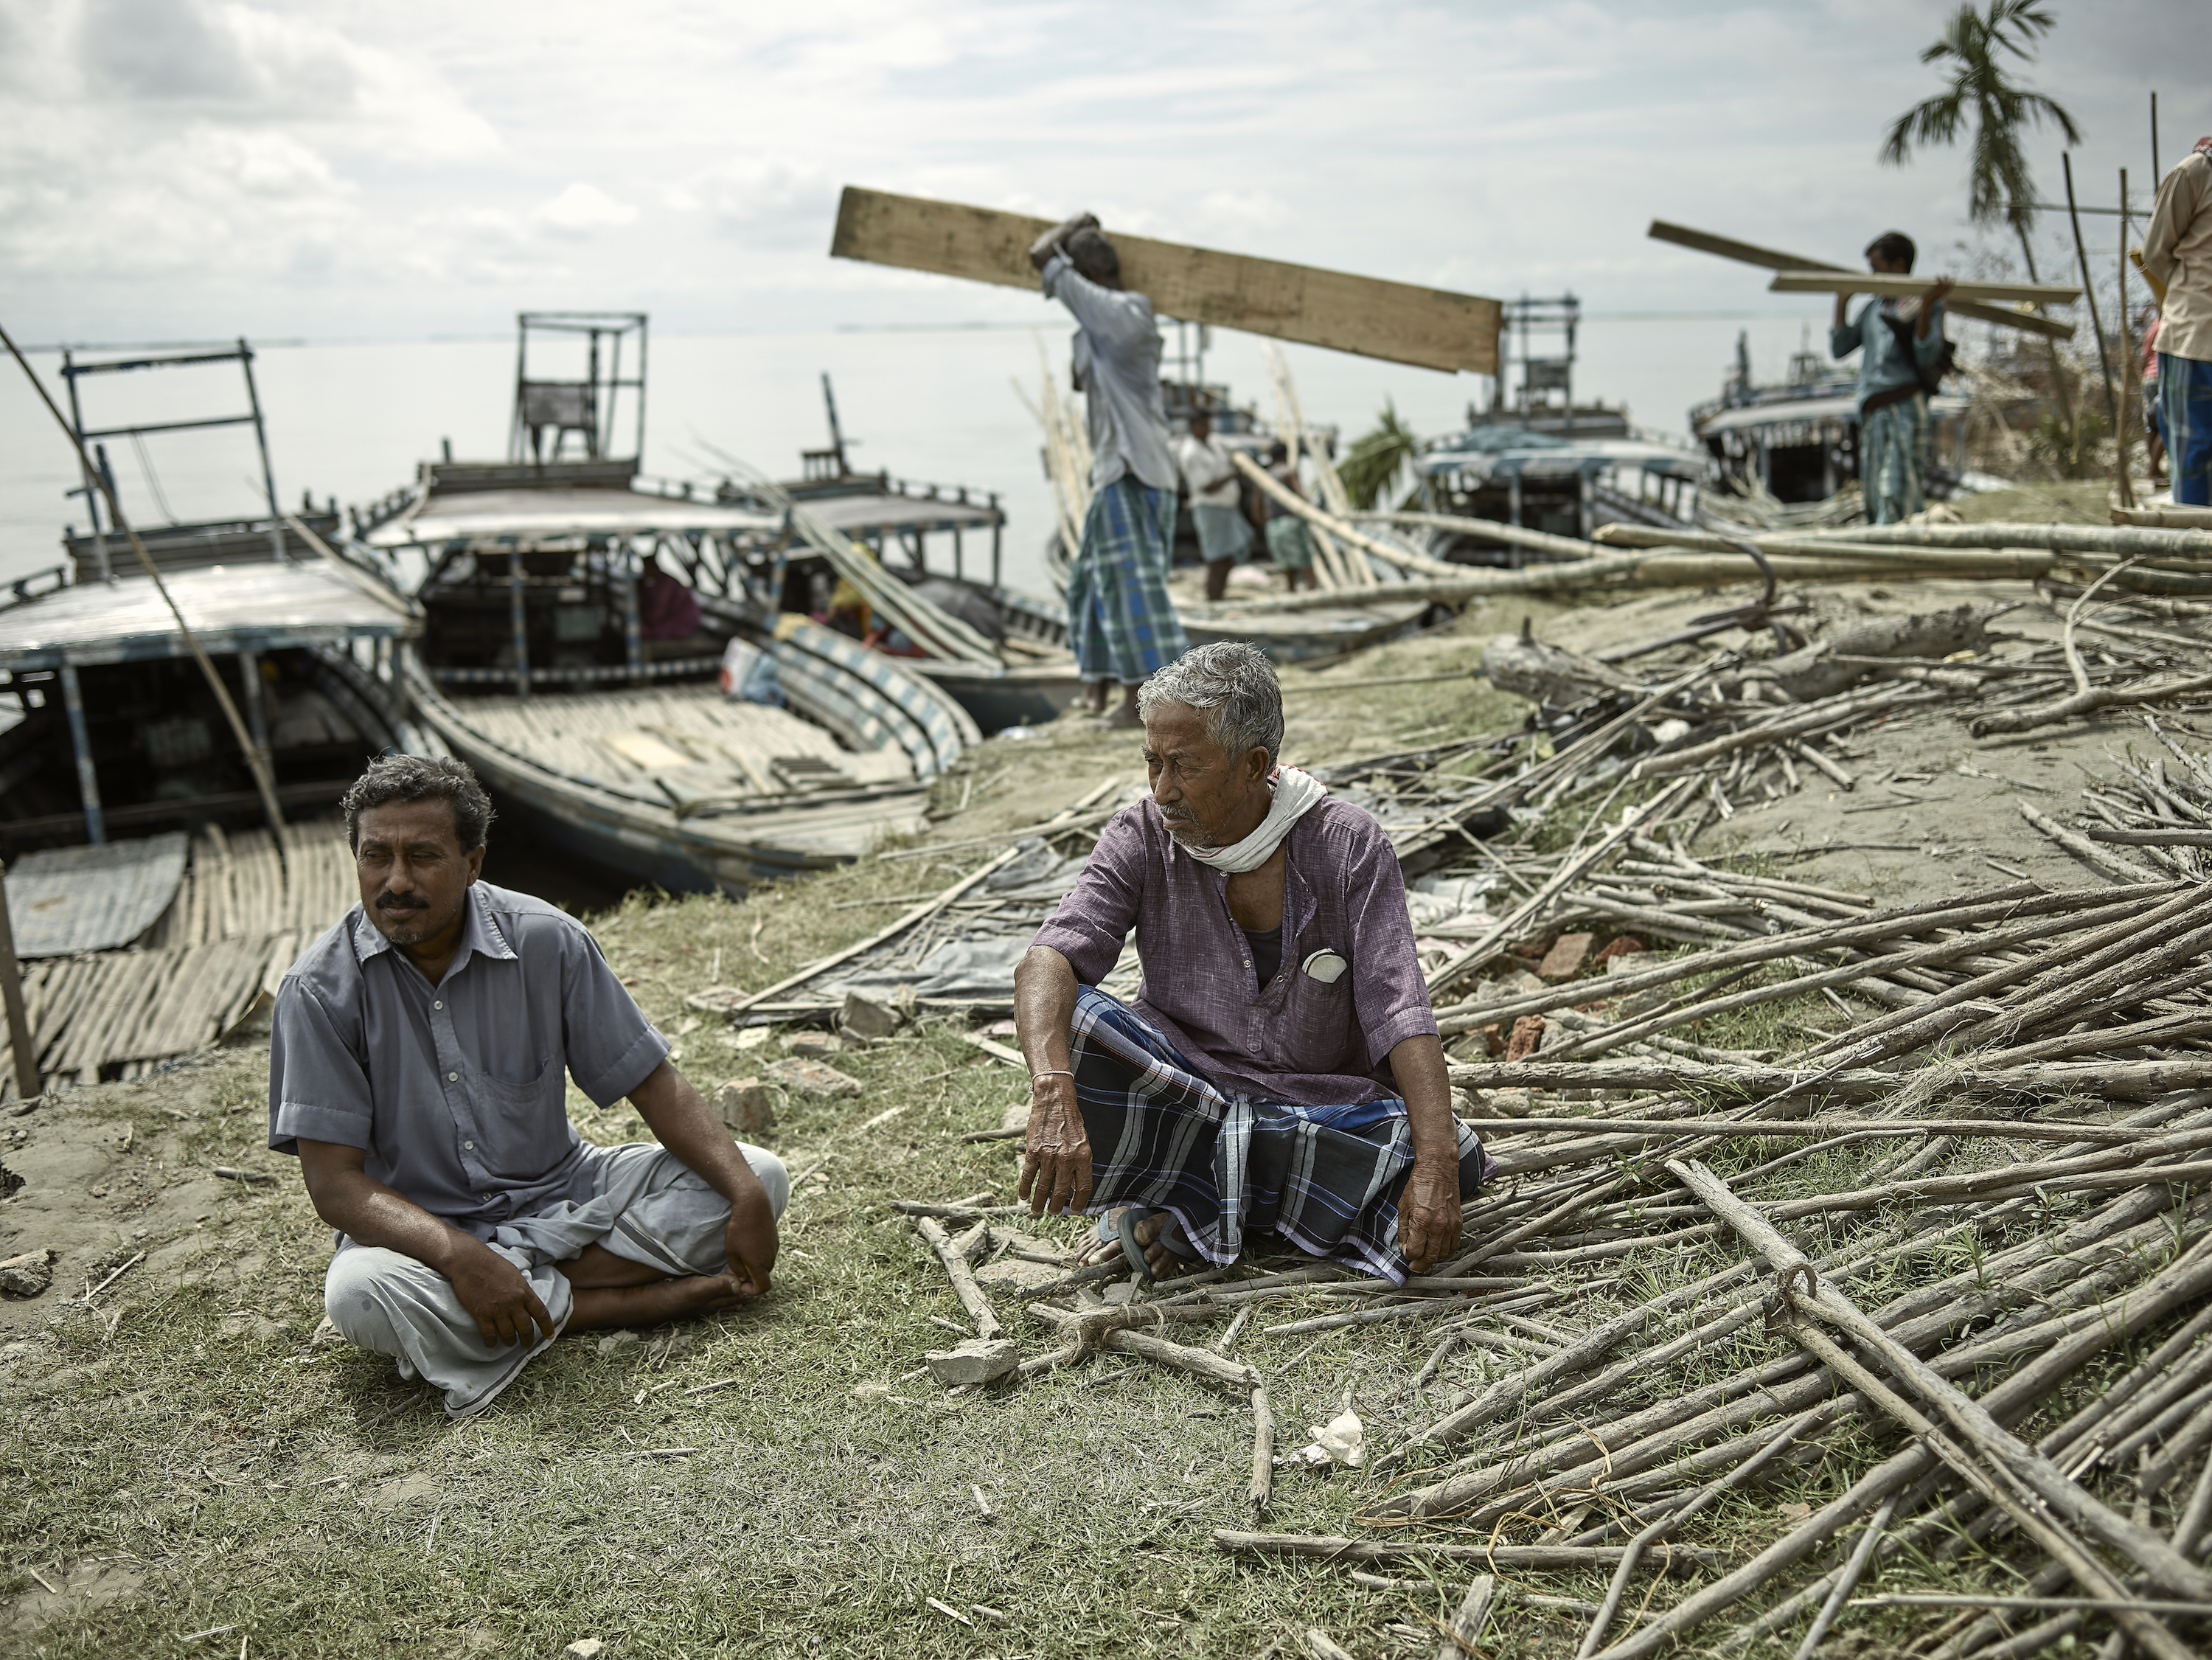 Moinul and Haidar Ali sit on the riverbank of Bhangnamari Char as the bamboo wreckage of their local school, built in 1948, is loaded onto ships for sale in the mainland. The school was destroyed during intense flooding in July.